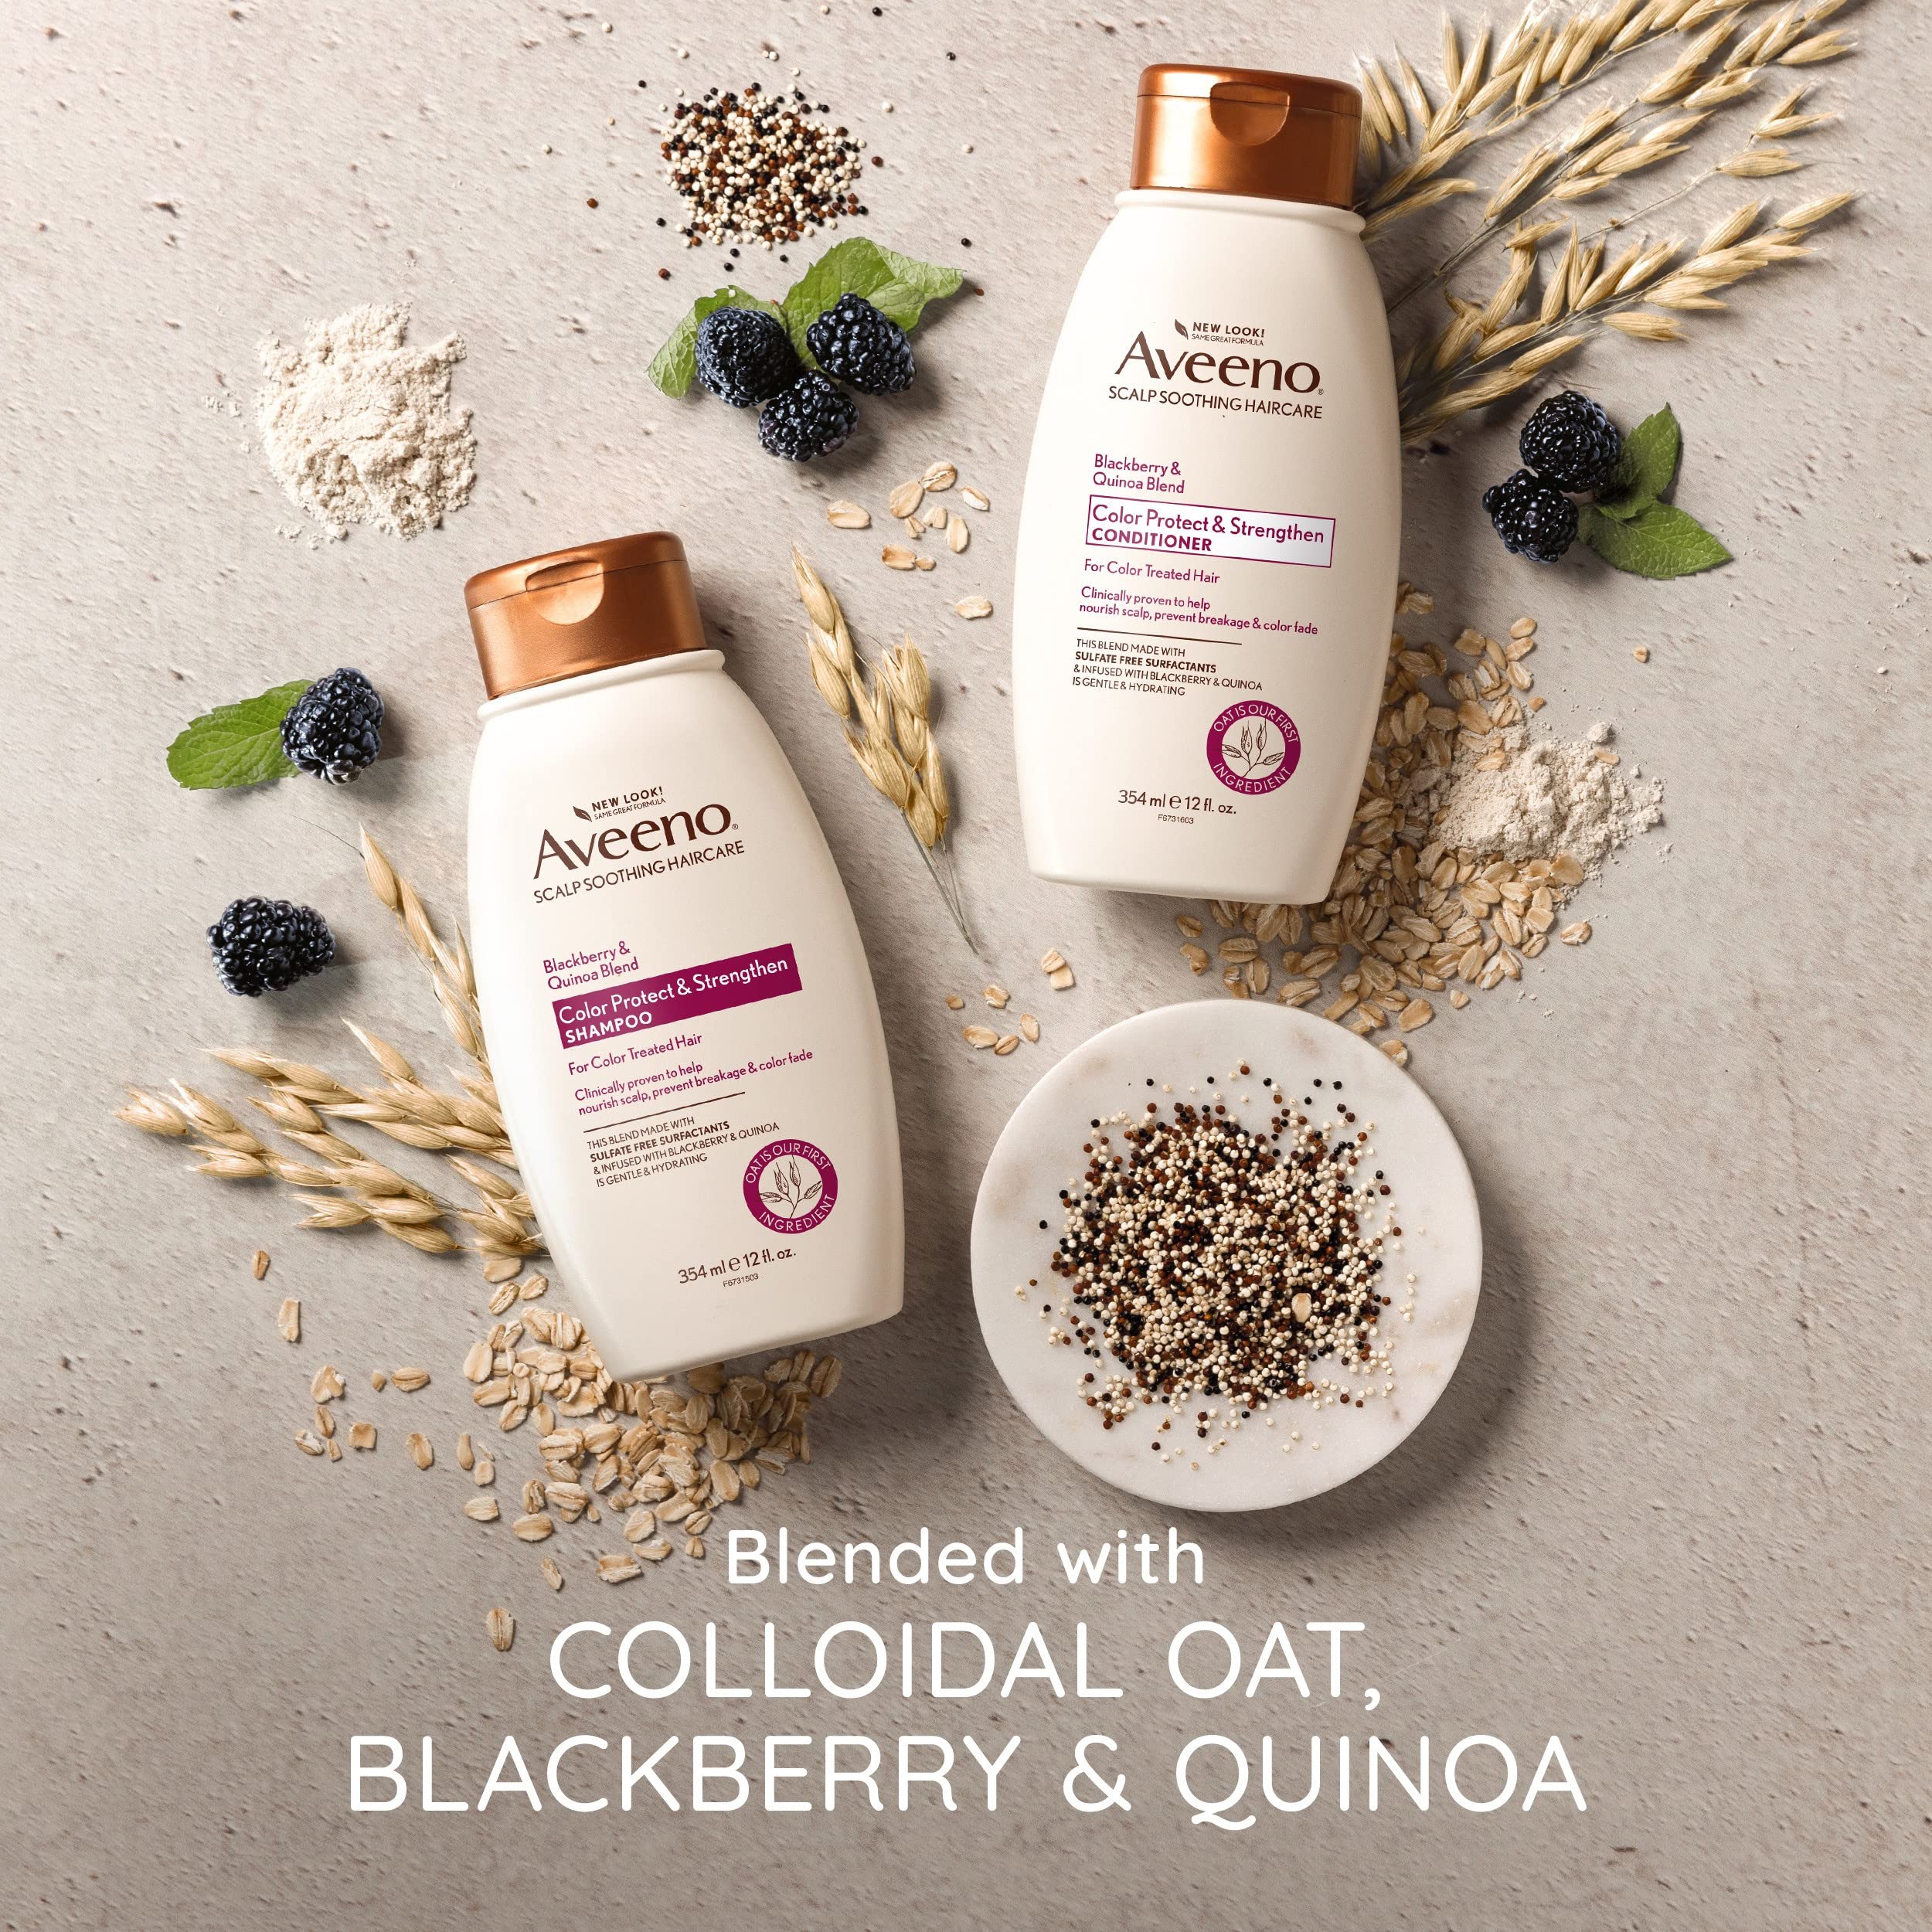 Aveeno Blackberry Quinoa Protein Blend Sulfate-Free Conditioner for Color-Treated Hair Protection, Daily Strengthening & Moisturizing Conditioner, Paraben & Dye-Free, 12 Fl Oz